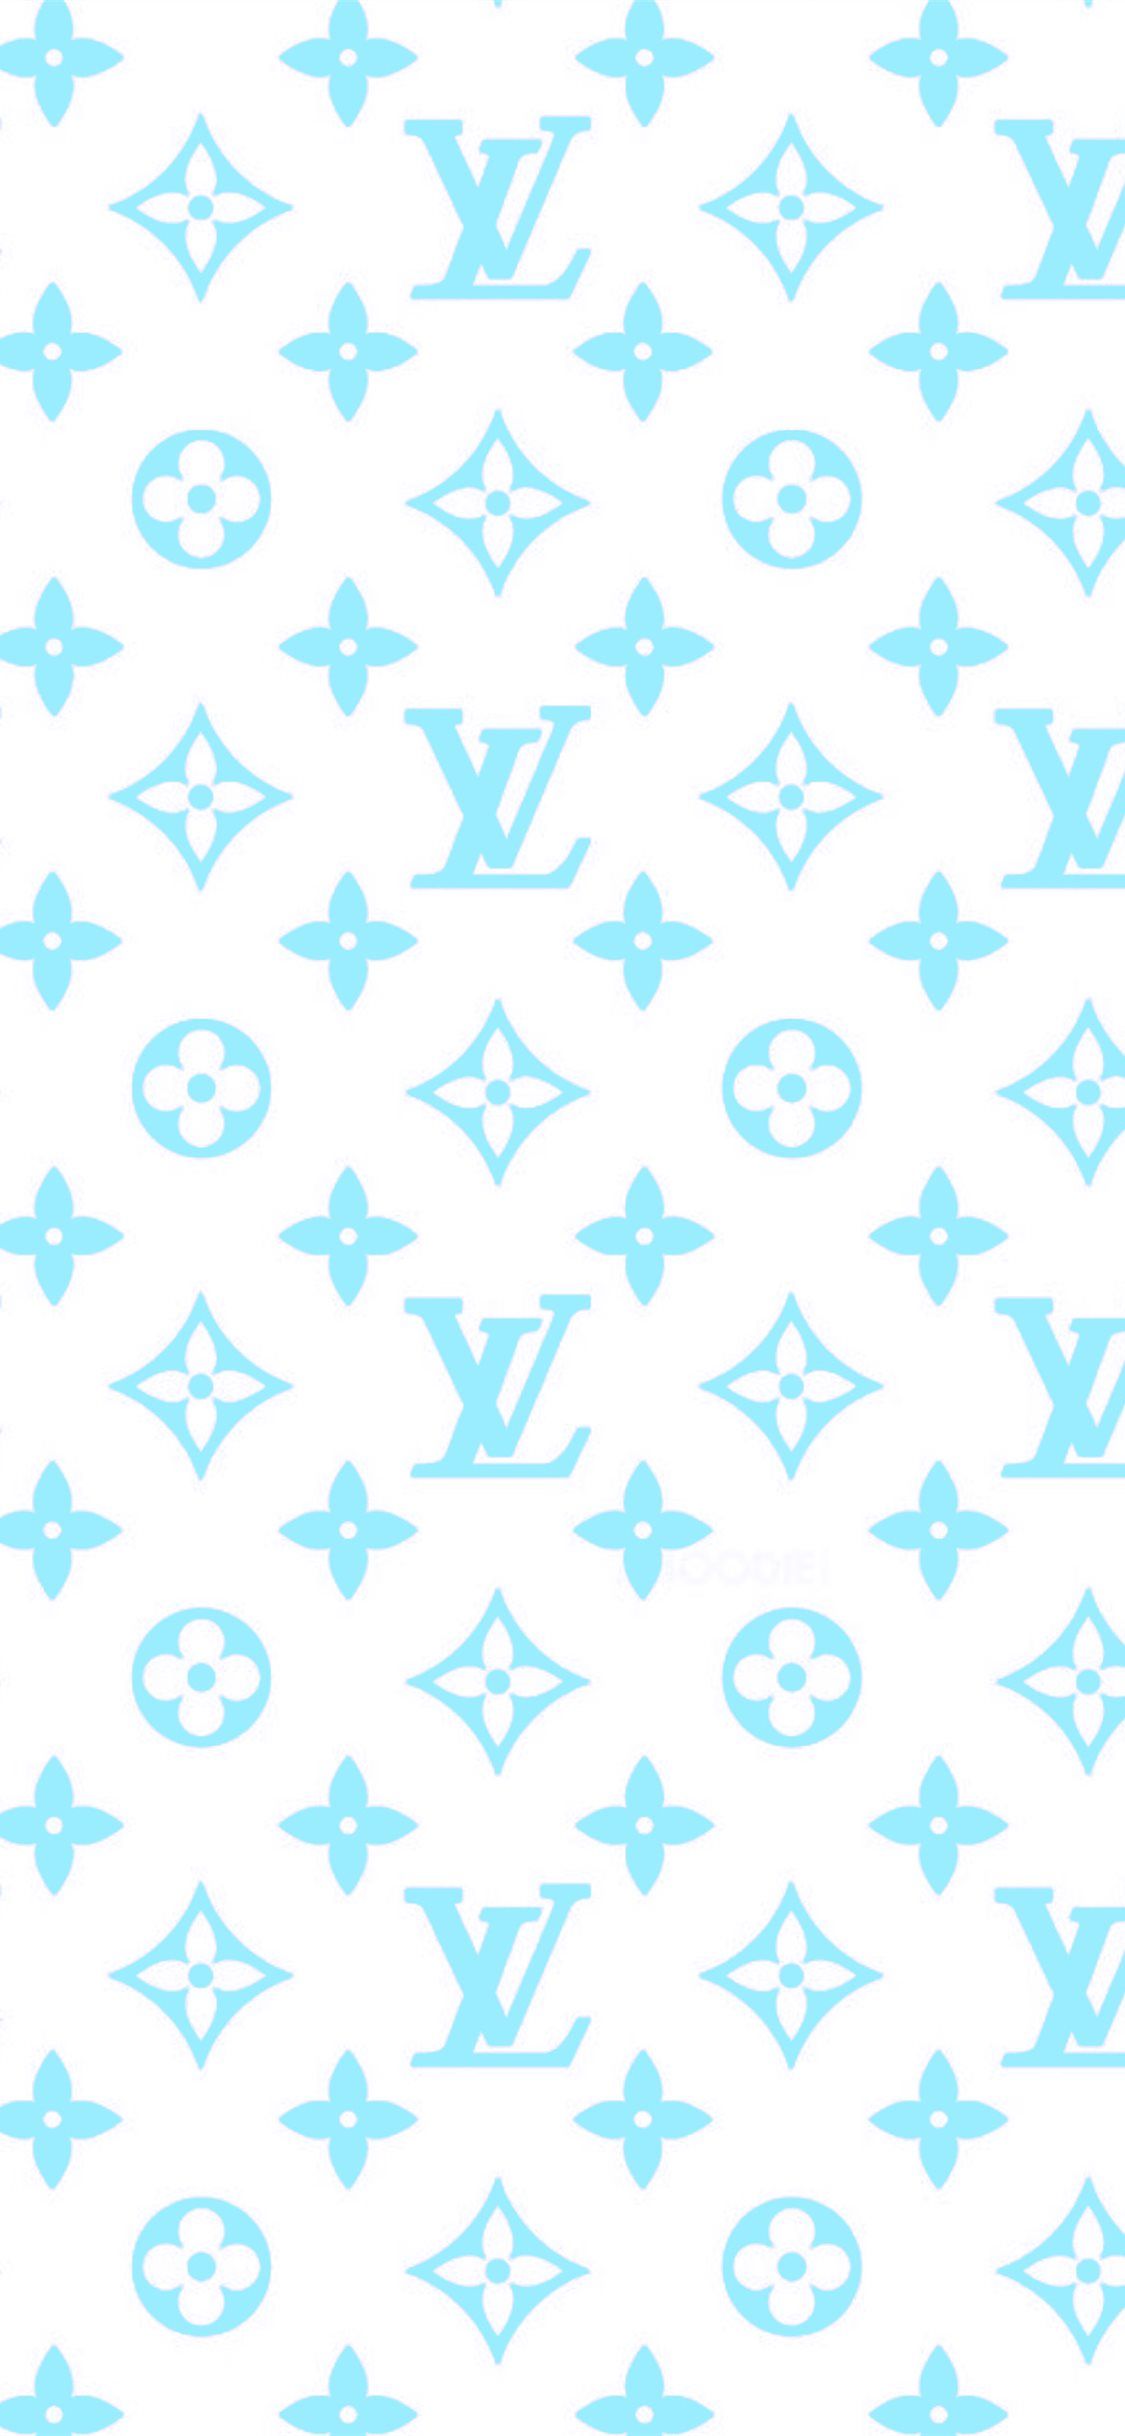 Louis Vuitton iPhone Wallpaper with high-resolution 1080x1920 pixel. You can use this wallpaper for your iPhone 5, 6, 7, 8, X, XS, XR backgrounds, Mobile Screensaver, or iPad Lock Screen - Louis Vuitton